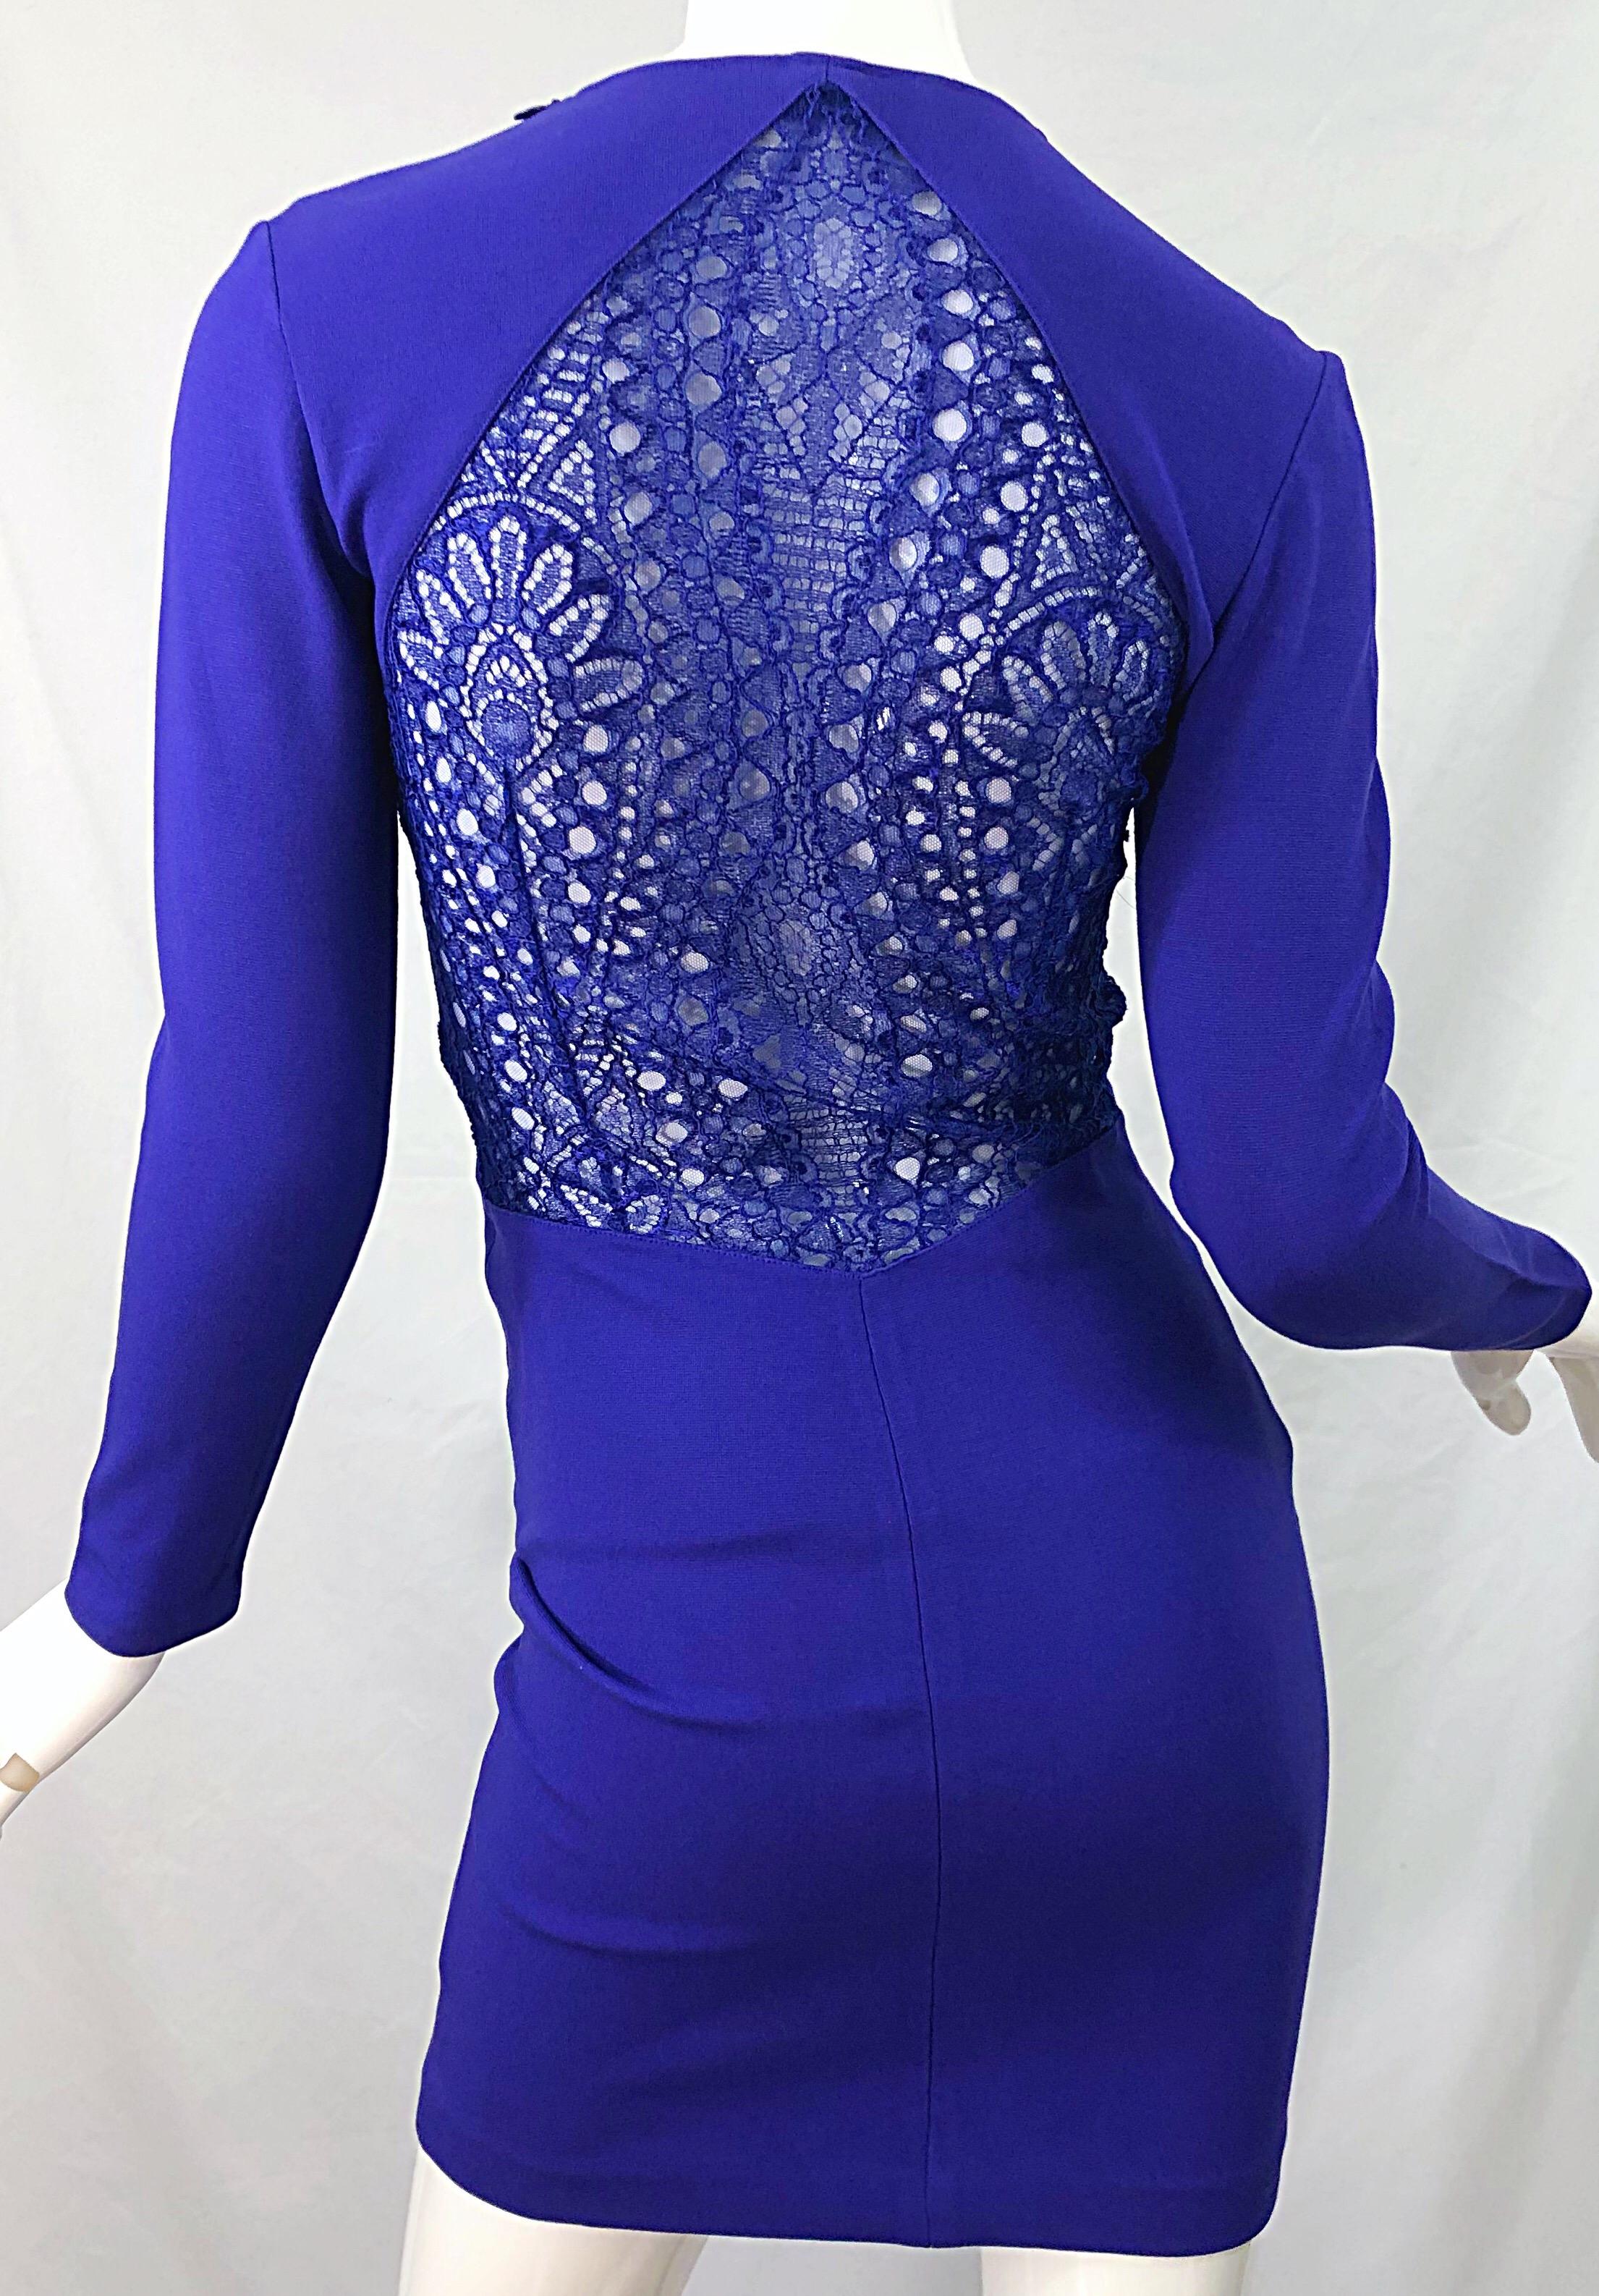 Emilio Pucci Fall 2012 Purple Rayon Lace Cut Out Long Sleeve Bodycon Dress For Sale 4